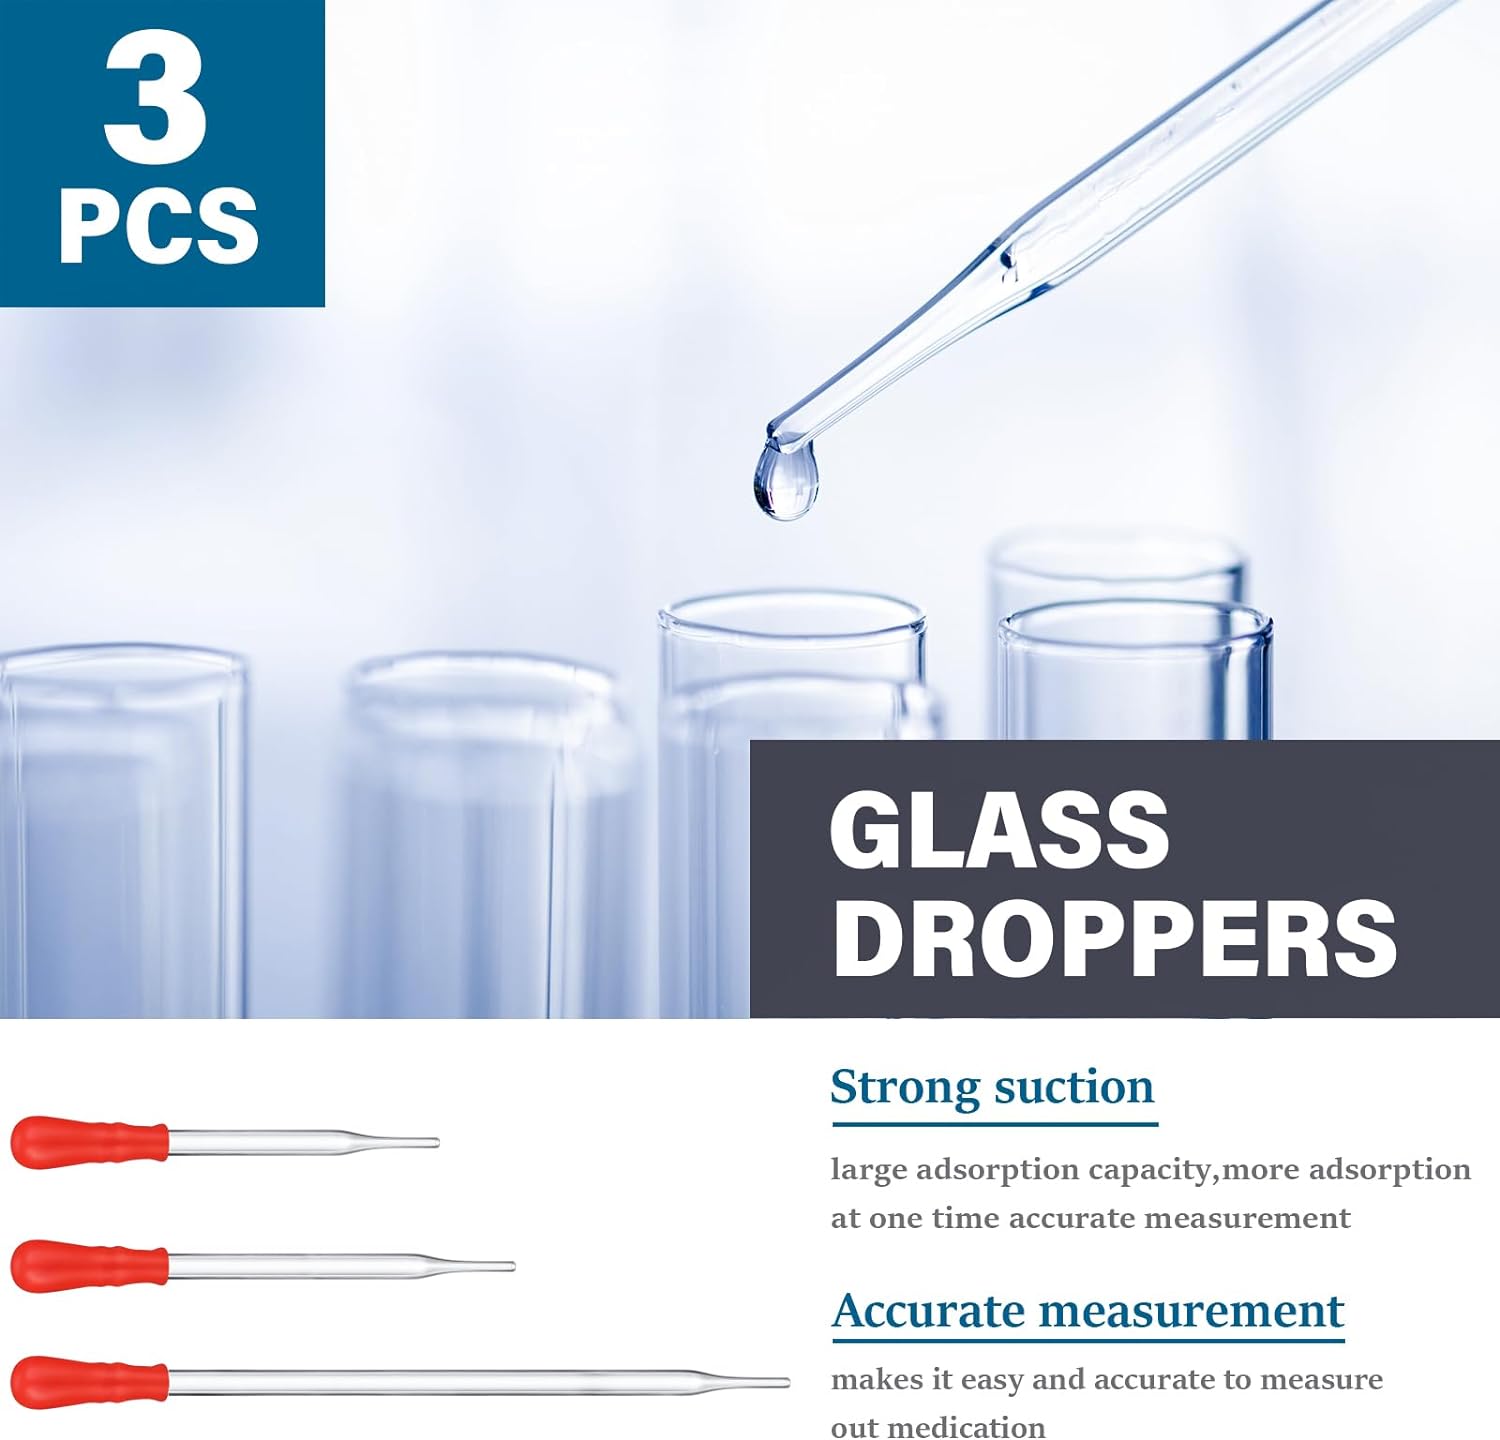 Essential Lab Glassware Set: 20 Pieces for Science Chemistry Experiments I Includes Graduated Cylinders, Glass Beakers, Droppers, Stirring Rods, and Measuring Cups